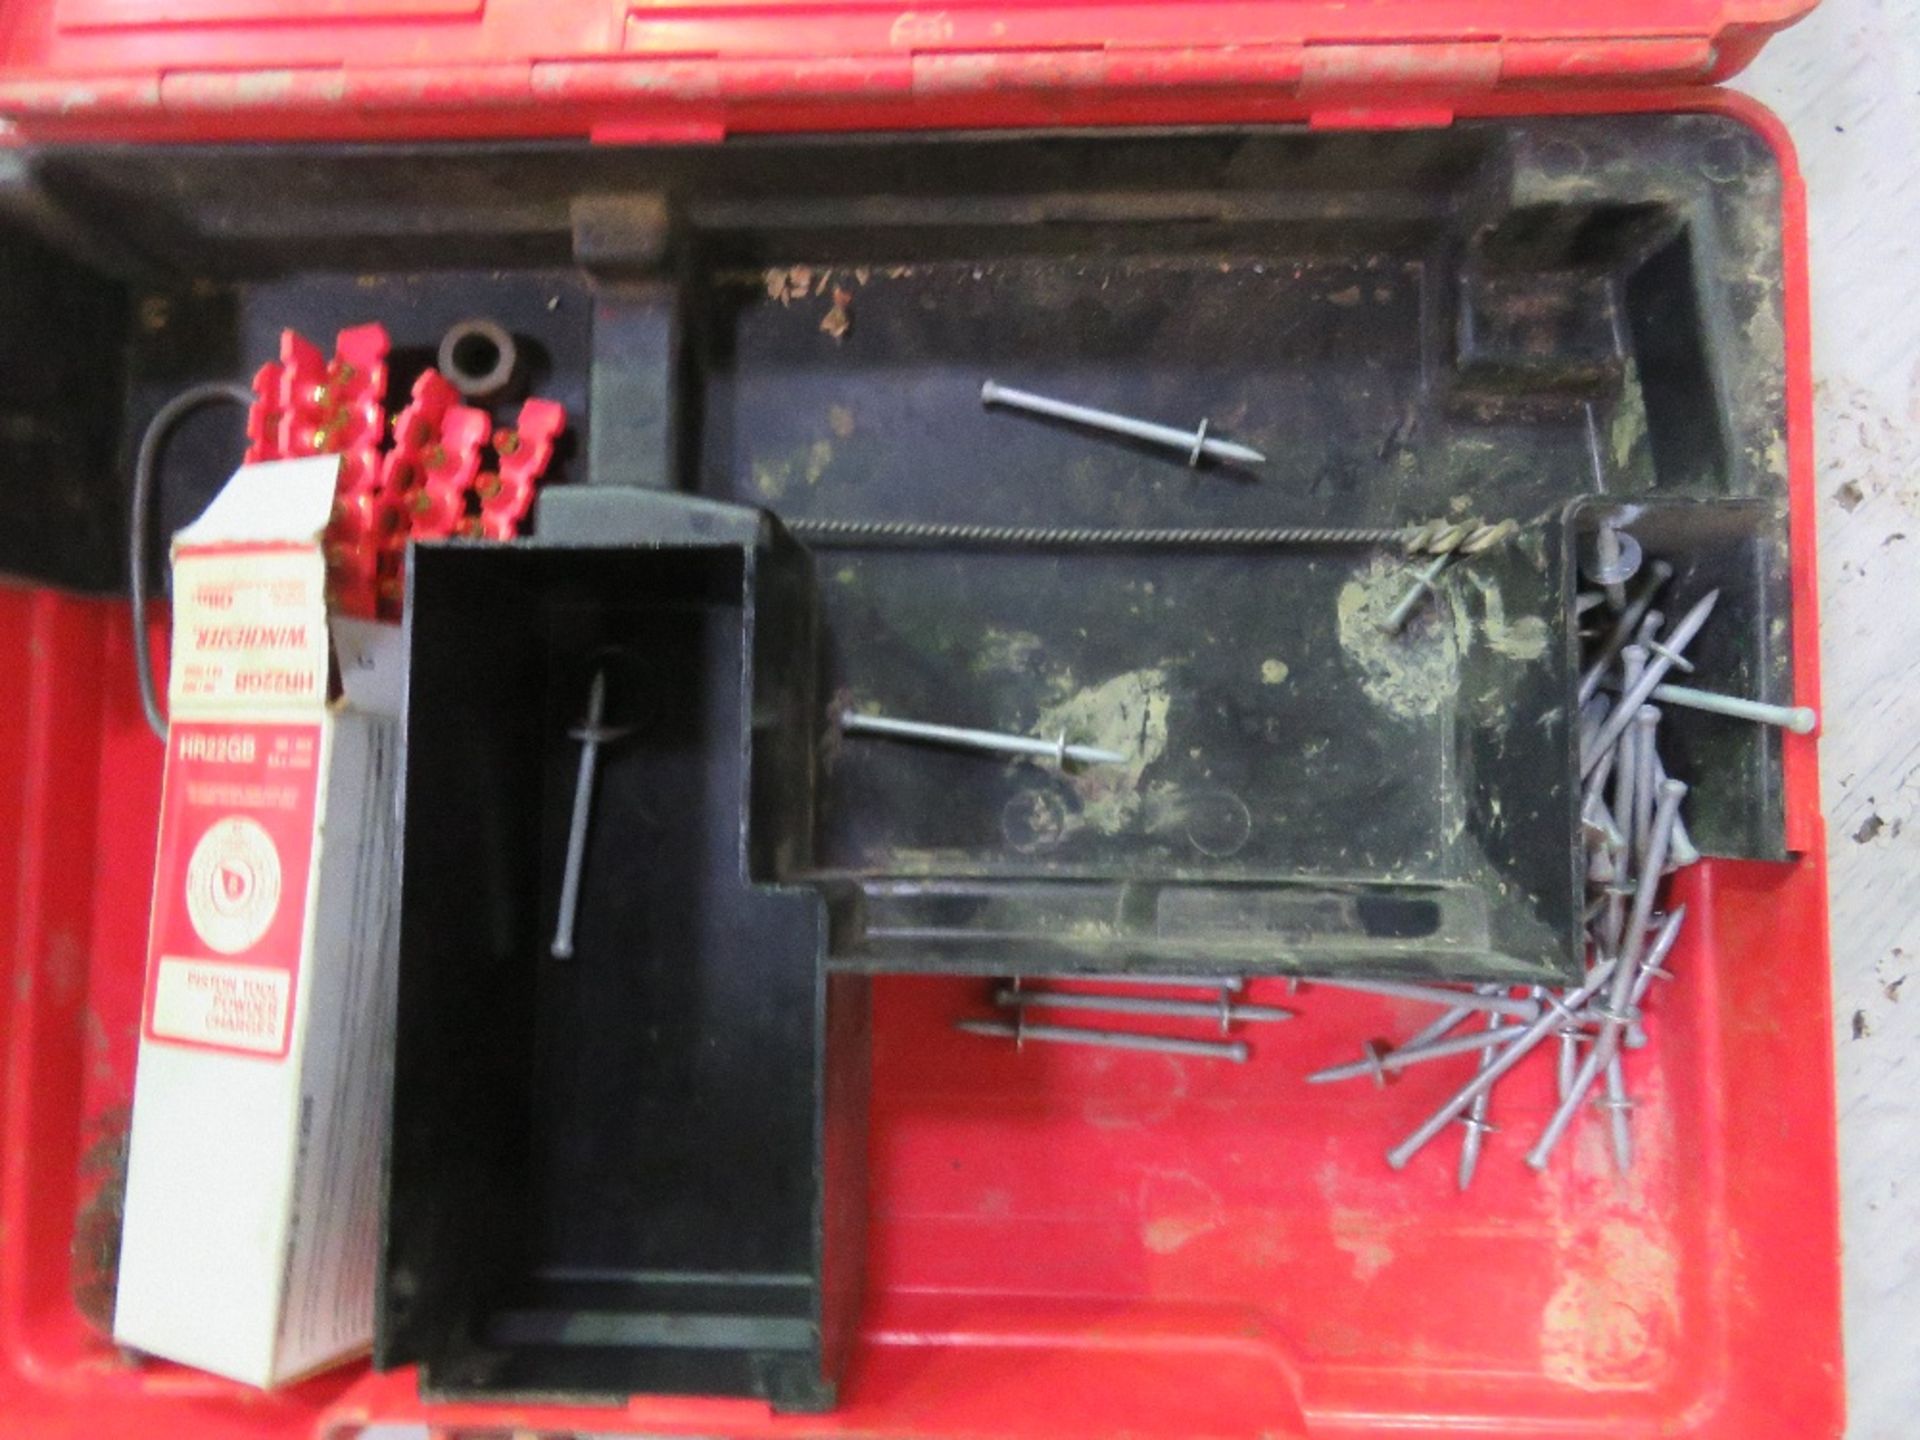 2 X HILTI DX450 NAIL GUNS. DIRECT FROM LOCAL RETIRING BUILDER. THIS LOT IS SOLD UNDER THE AUCTI - Image 3 of 6